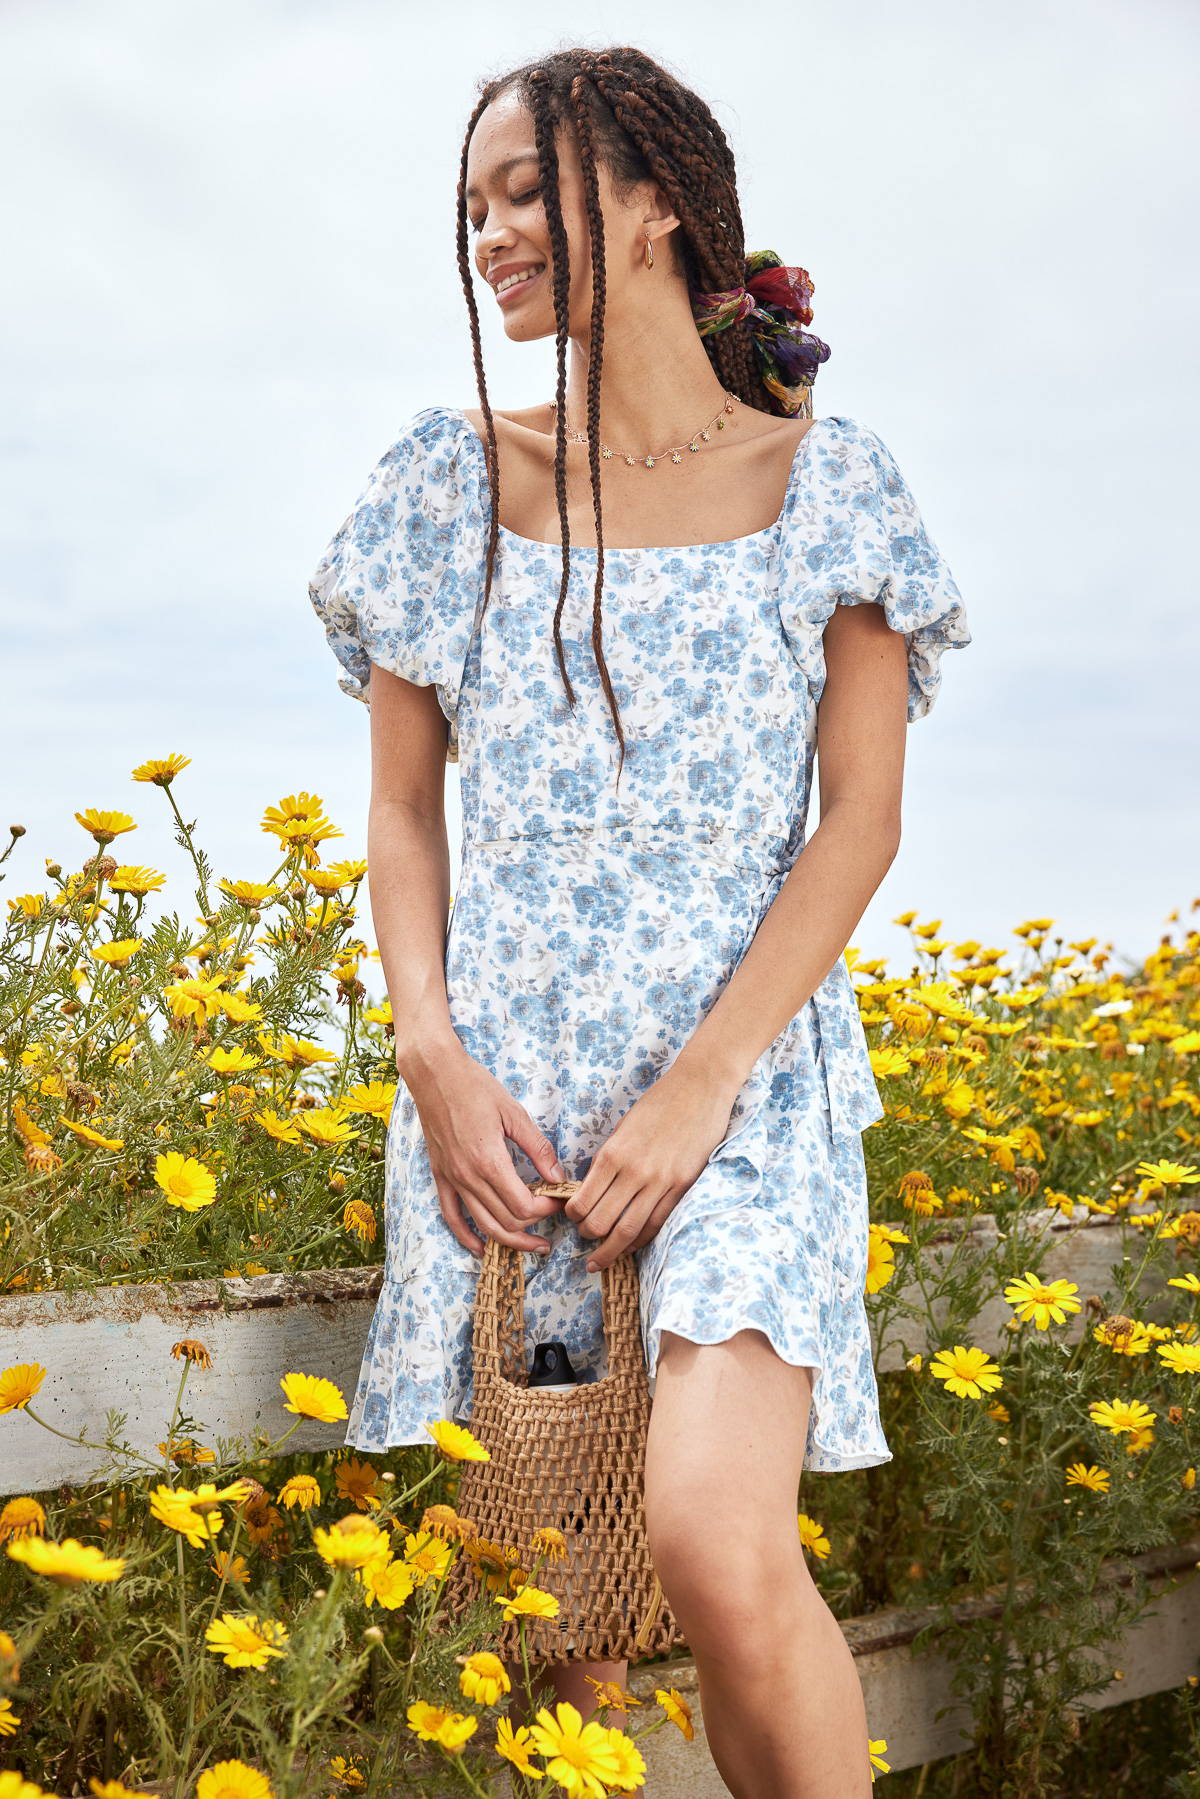 Trixxi sun-kissed summer lookbook, girl withyellow sunglasses, blue printed floral dress in field of yellow flowers. 